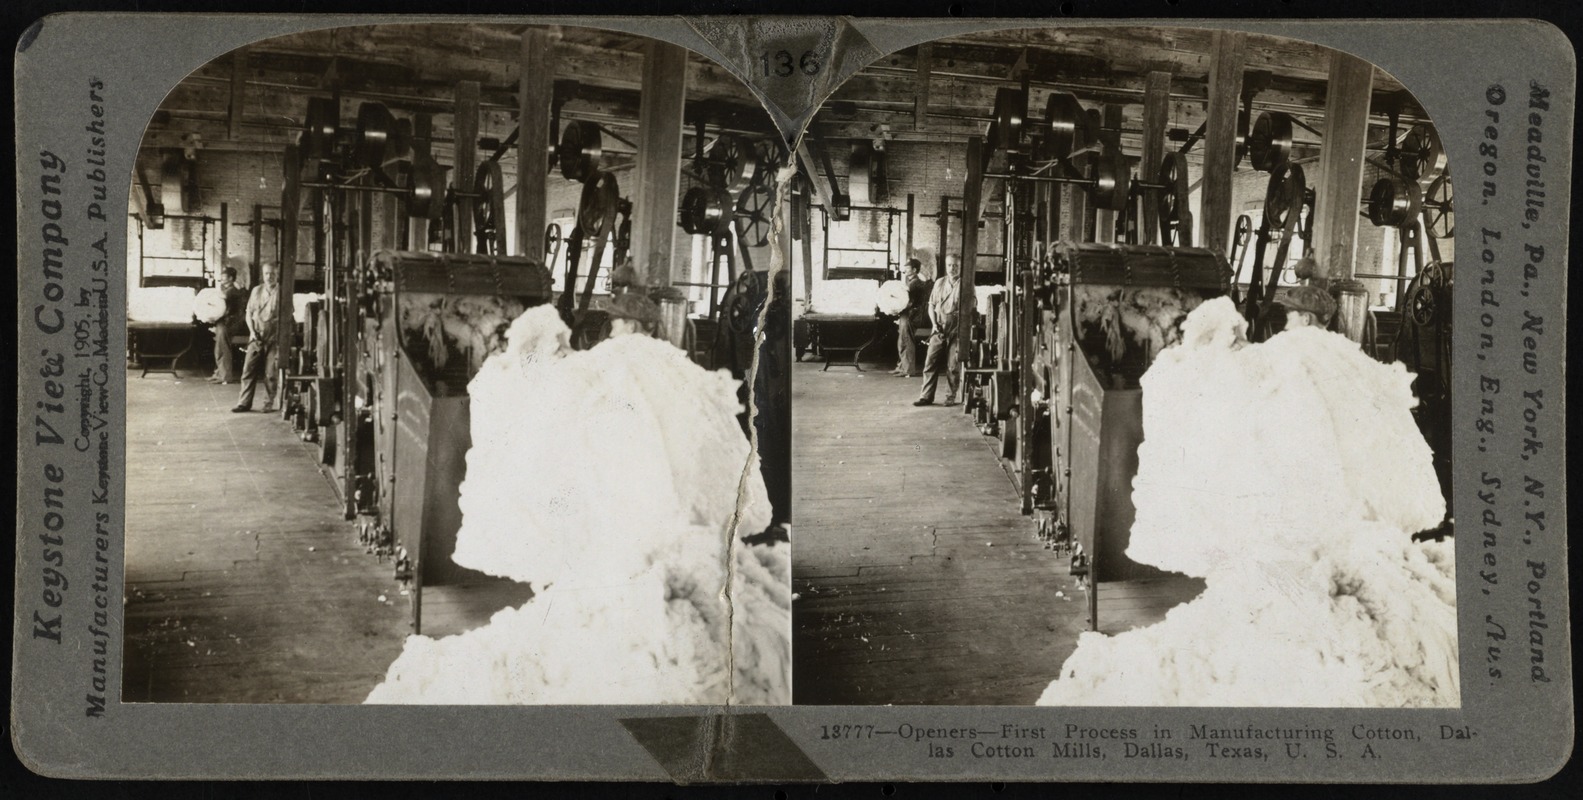 Openers - first process in manufacturing cotton